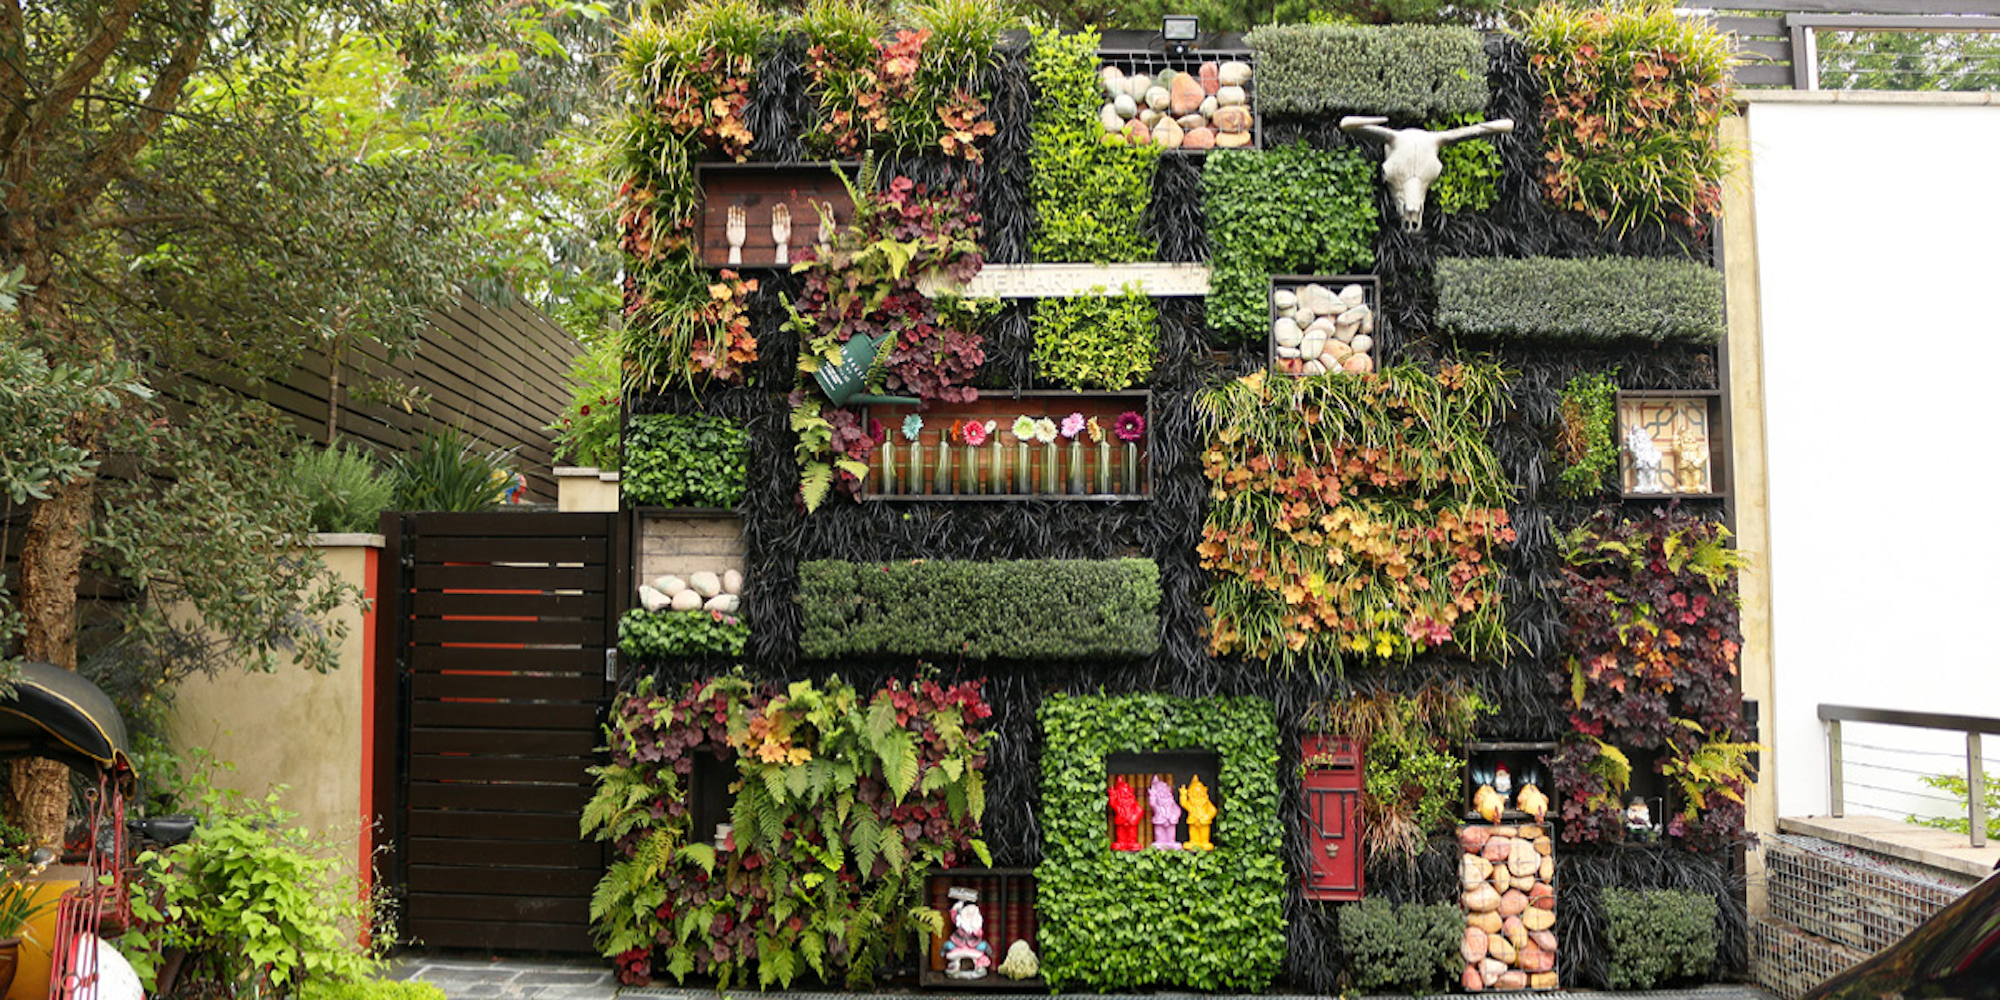 living green wall as a feature in a driveway